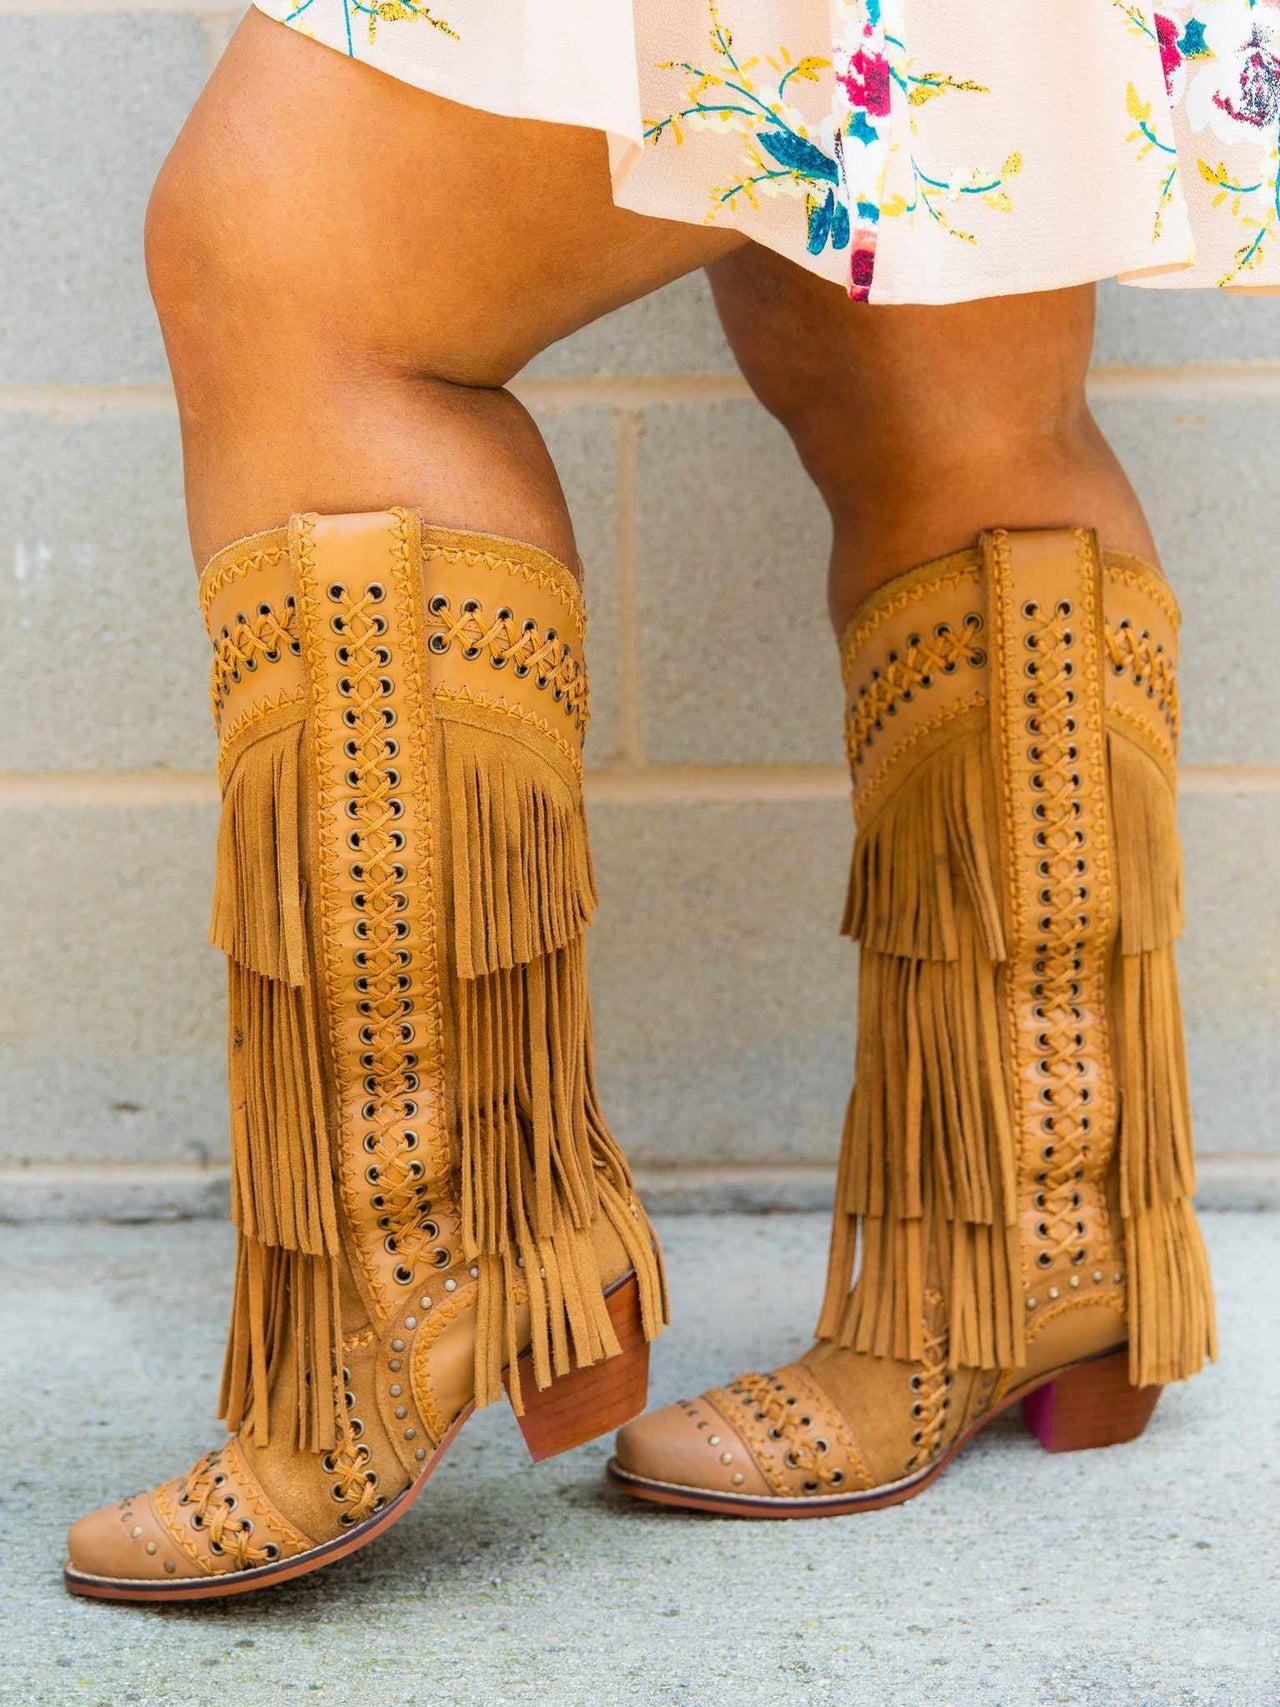 All Around The Fringe — Wide Calf Western Fringe Boots in Tan Leather